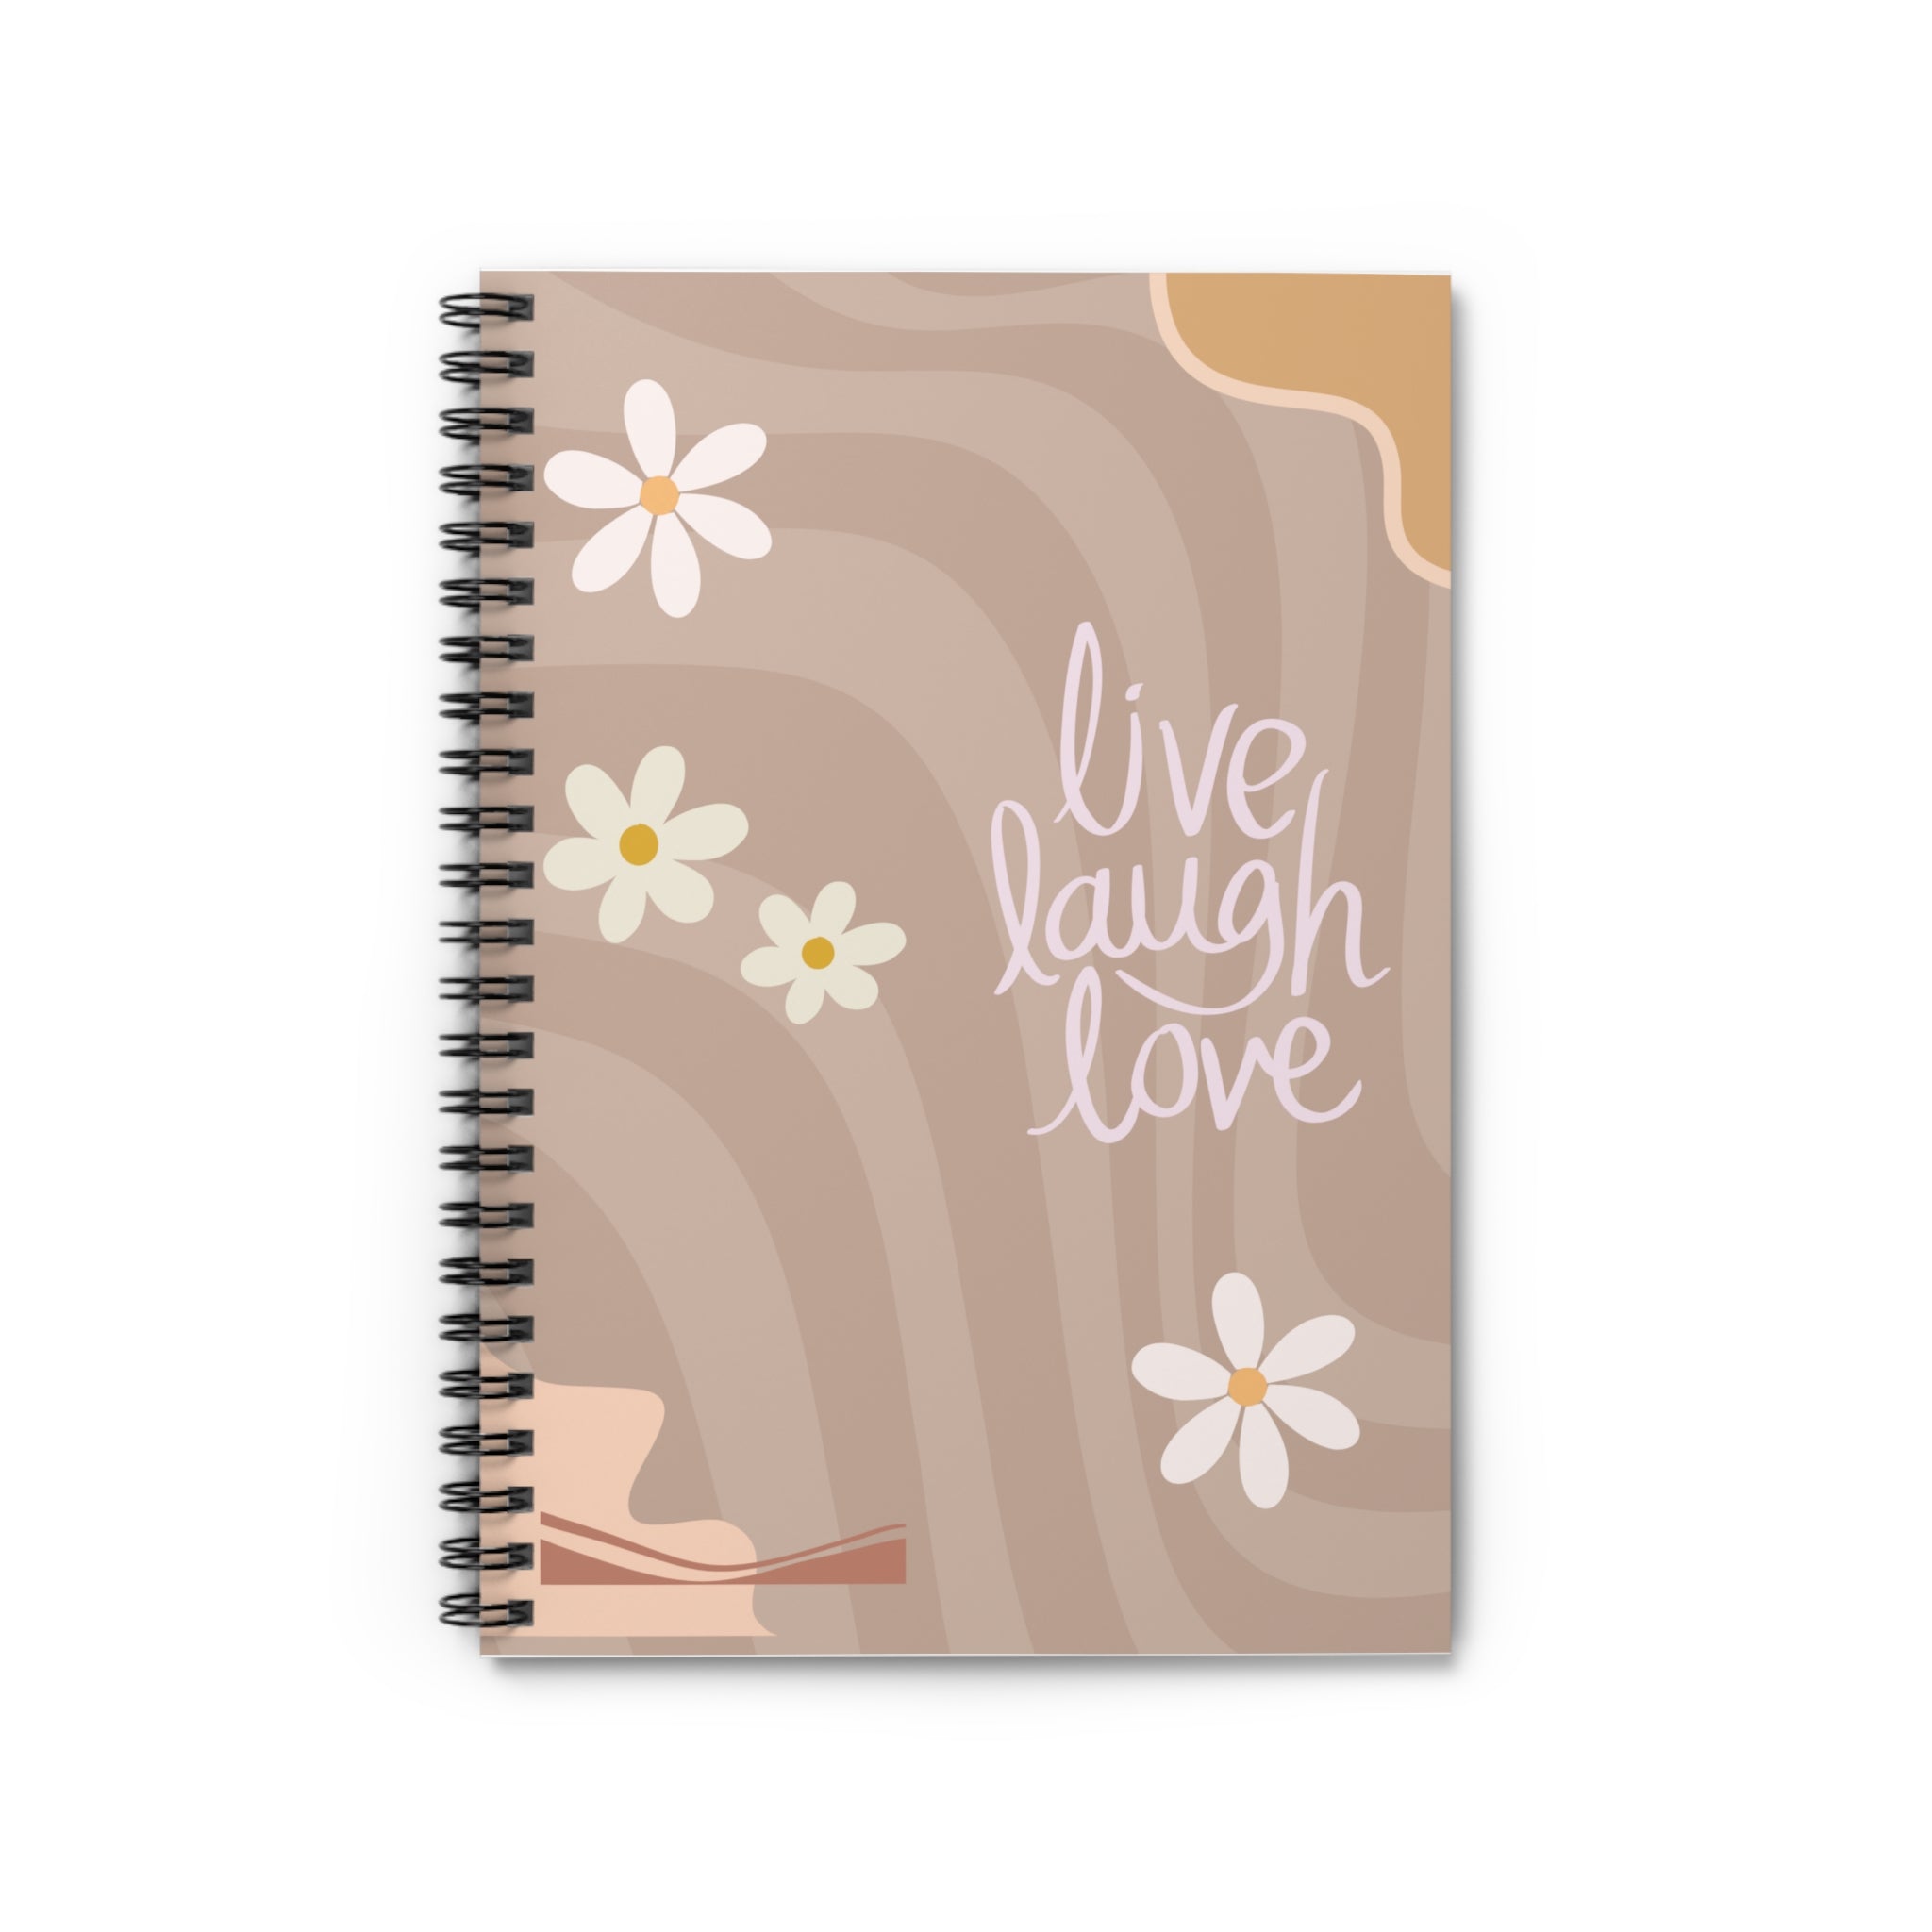 Live Laugh Love Spiral Notebook - Ruled Line